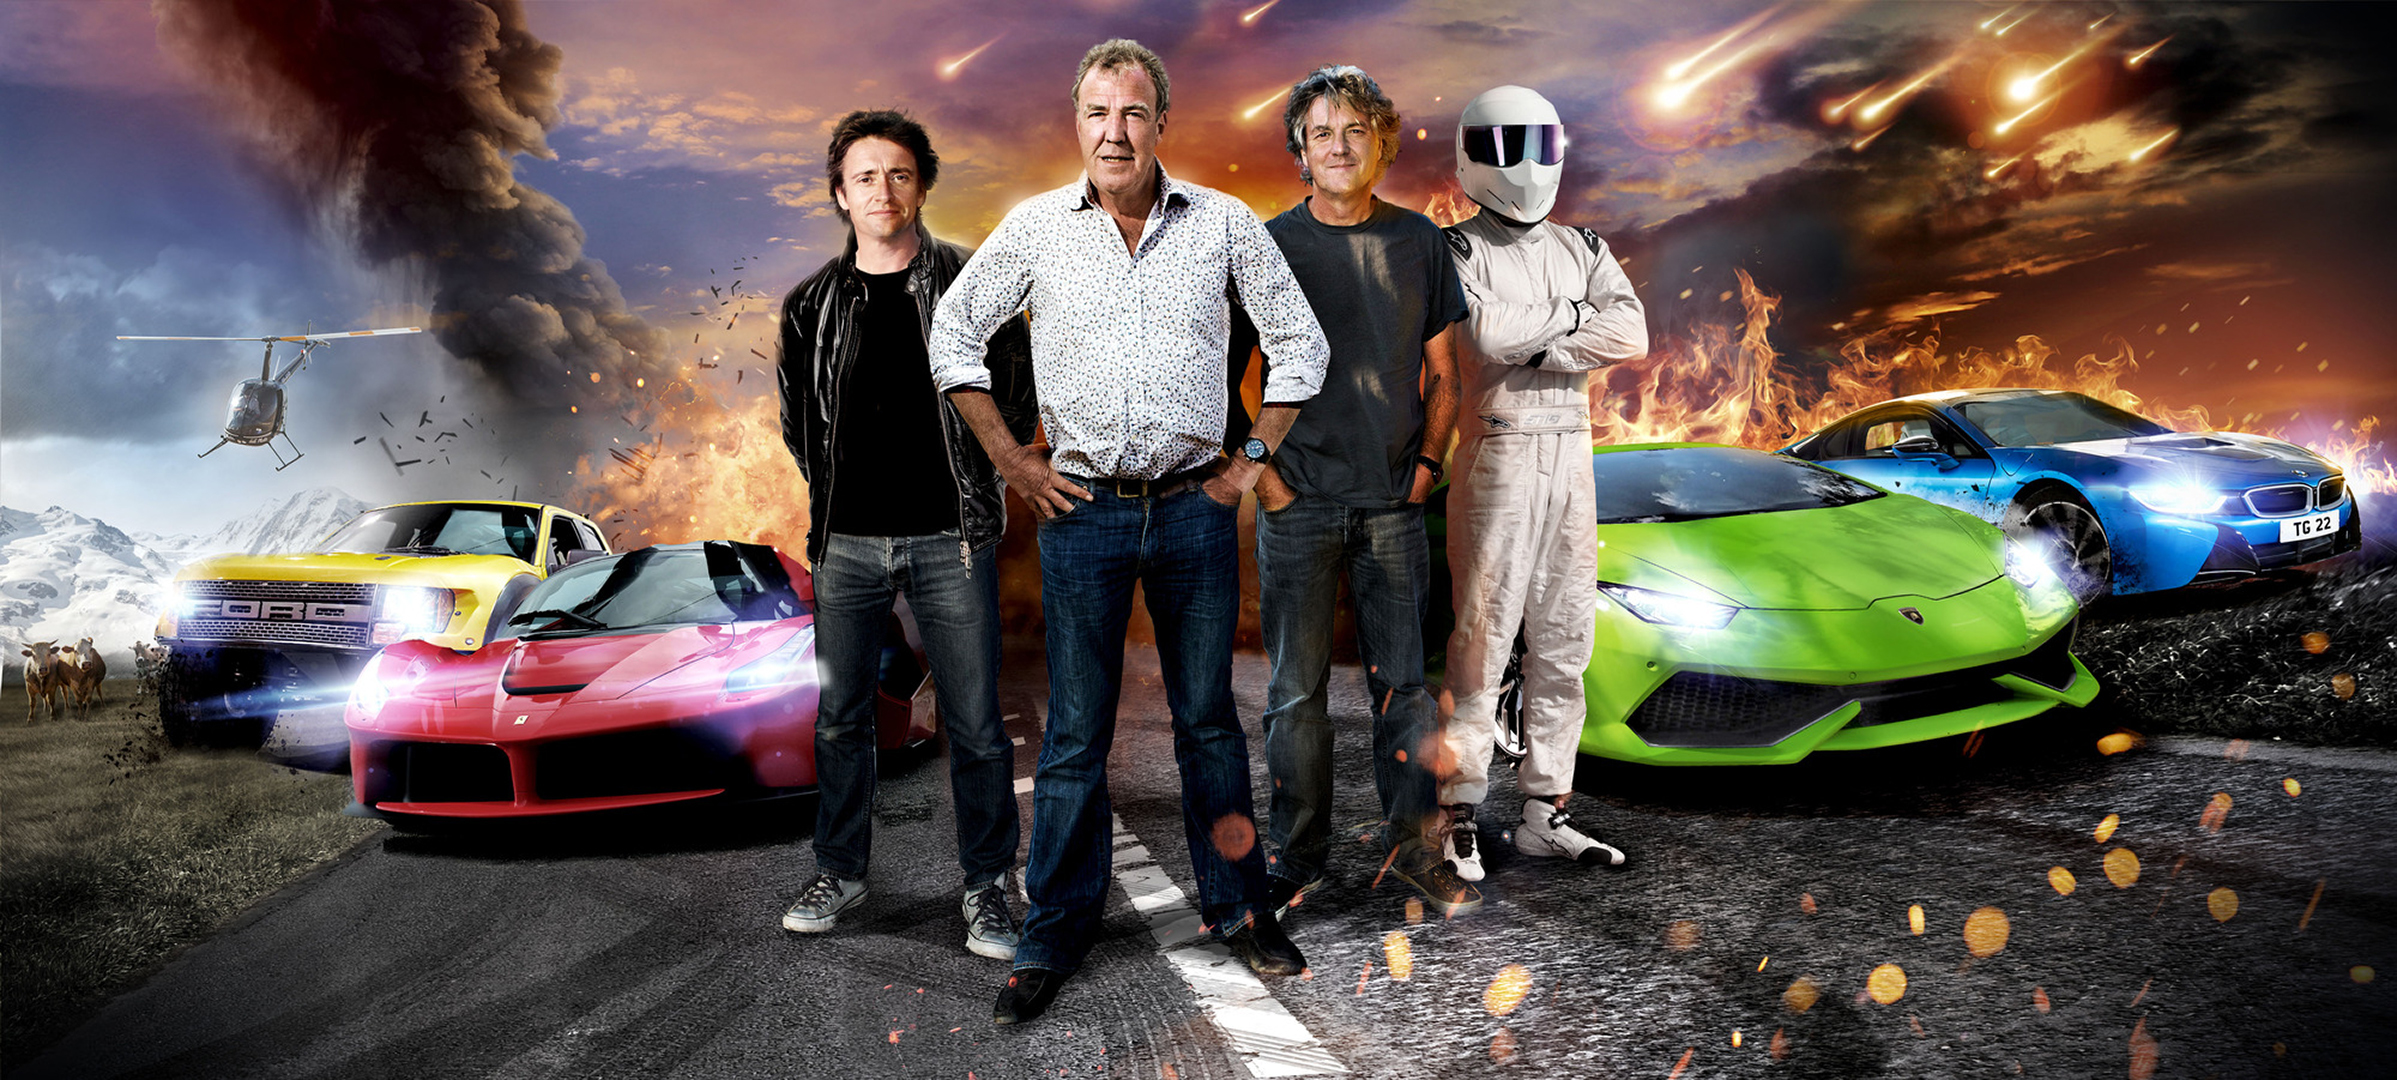 Free photo Cool screensaver from Top Gear